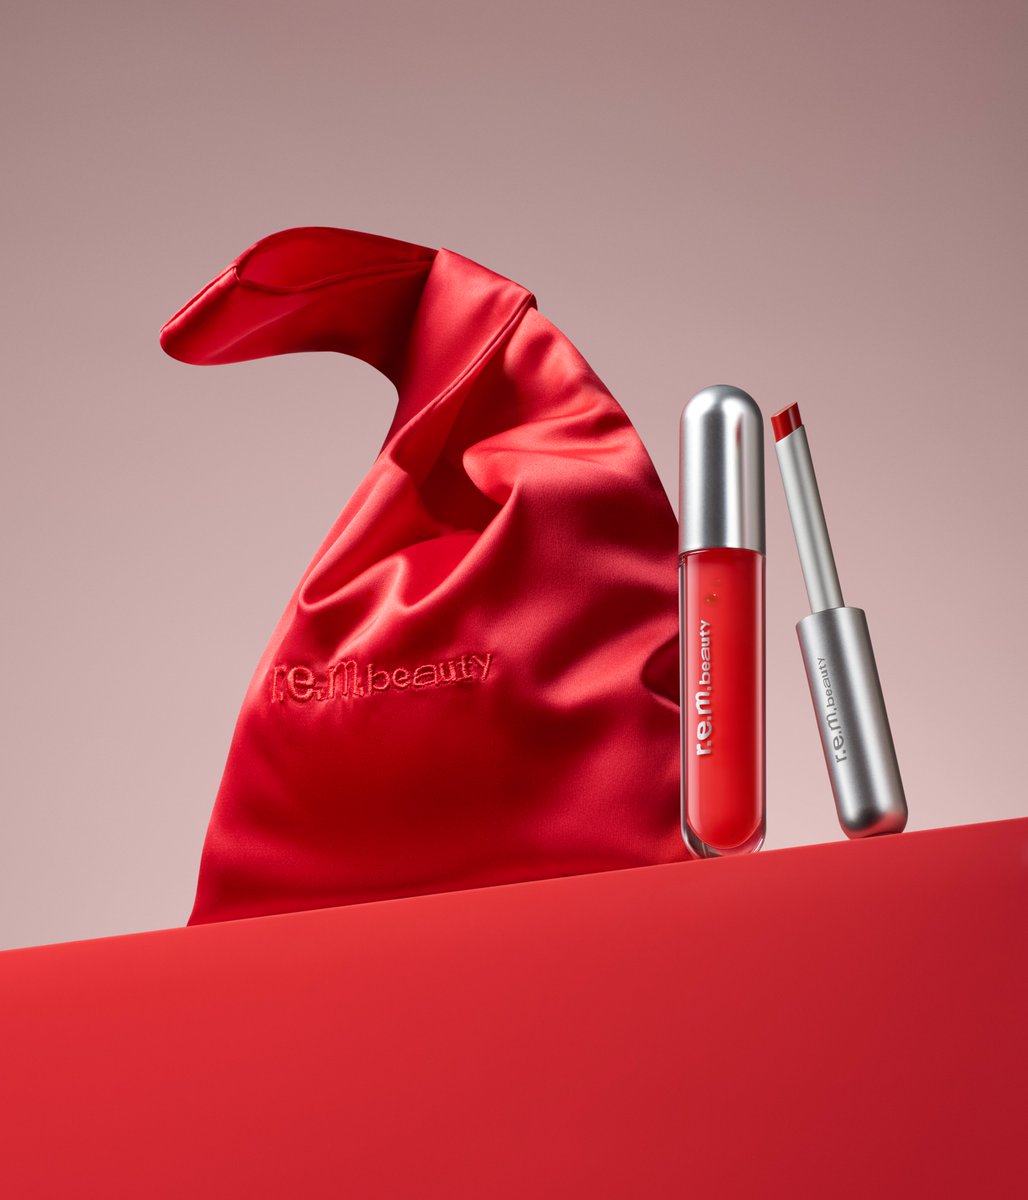 introducing the eternally red lip set ♾☼ ⋆｡˚⋆ this limited-edition set puts a glossy spin on ari's go-to red lip inspired by her latest album includes: ▫️ #onyourcollar classic lipstick in “attention” ▫️ #essentialdrip glossy balm in “shirley” ▫️ an exclusive red satin